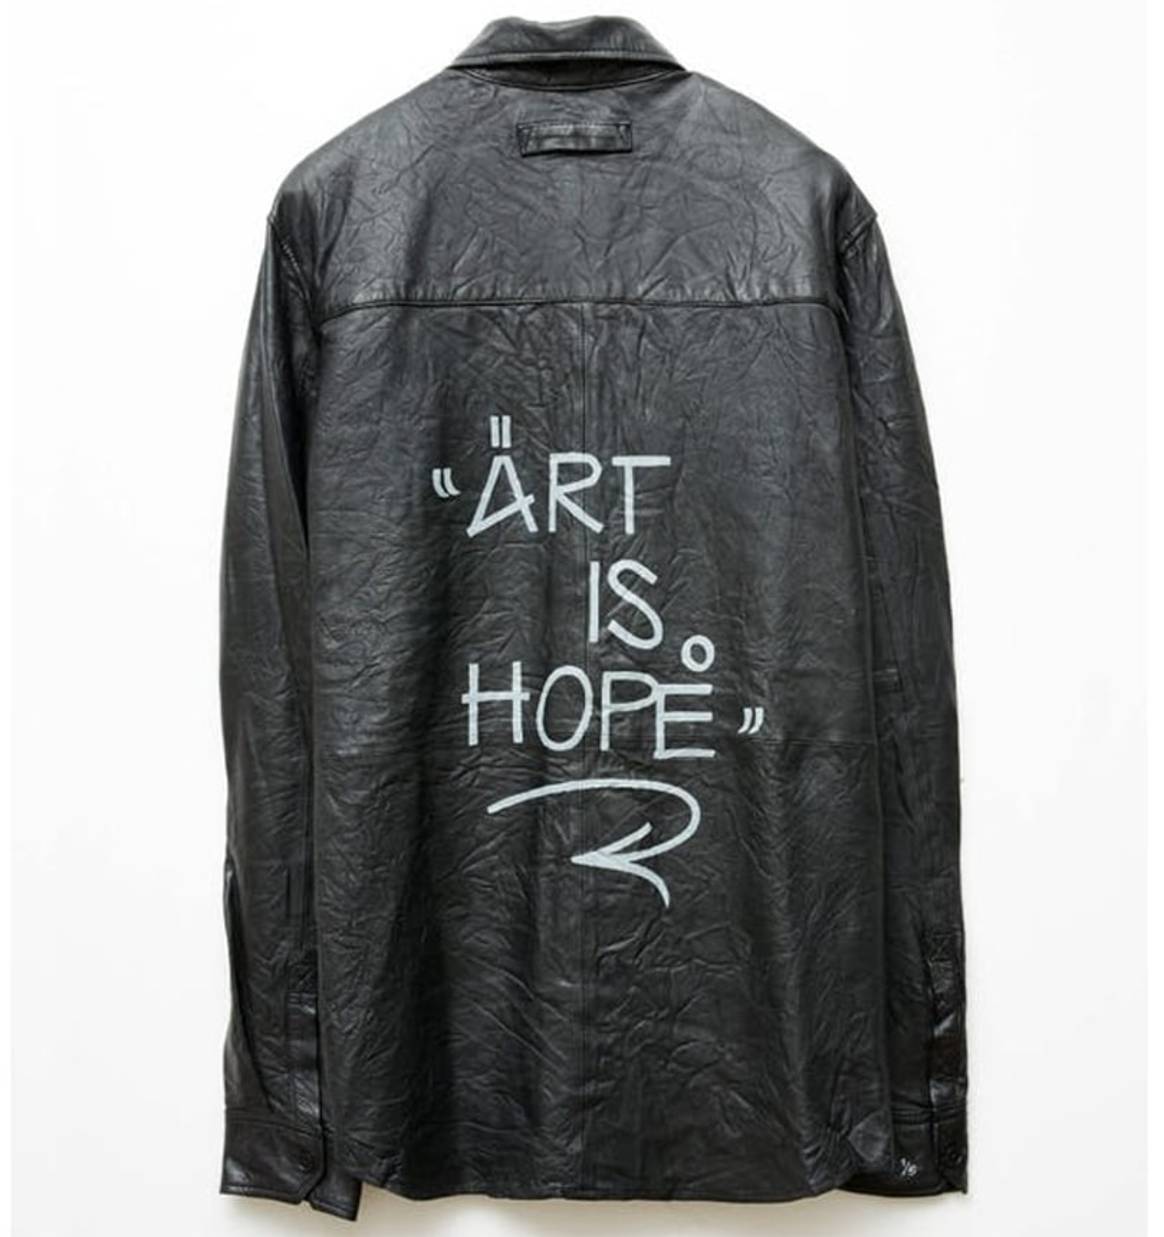 Zadig & Voltaire donates all proceeds of art Collection to Black Art in America